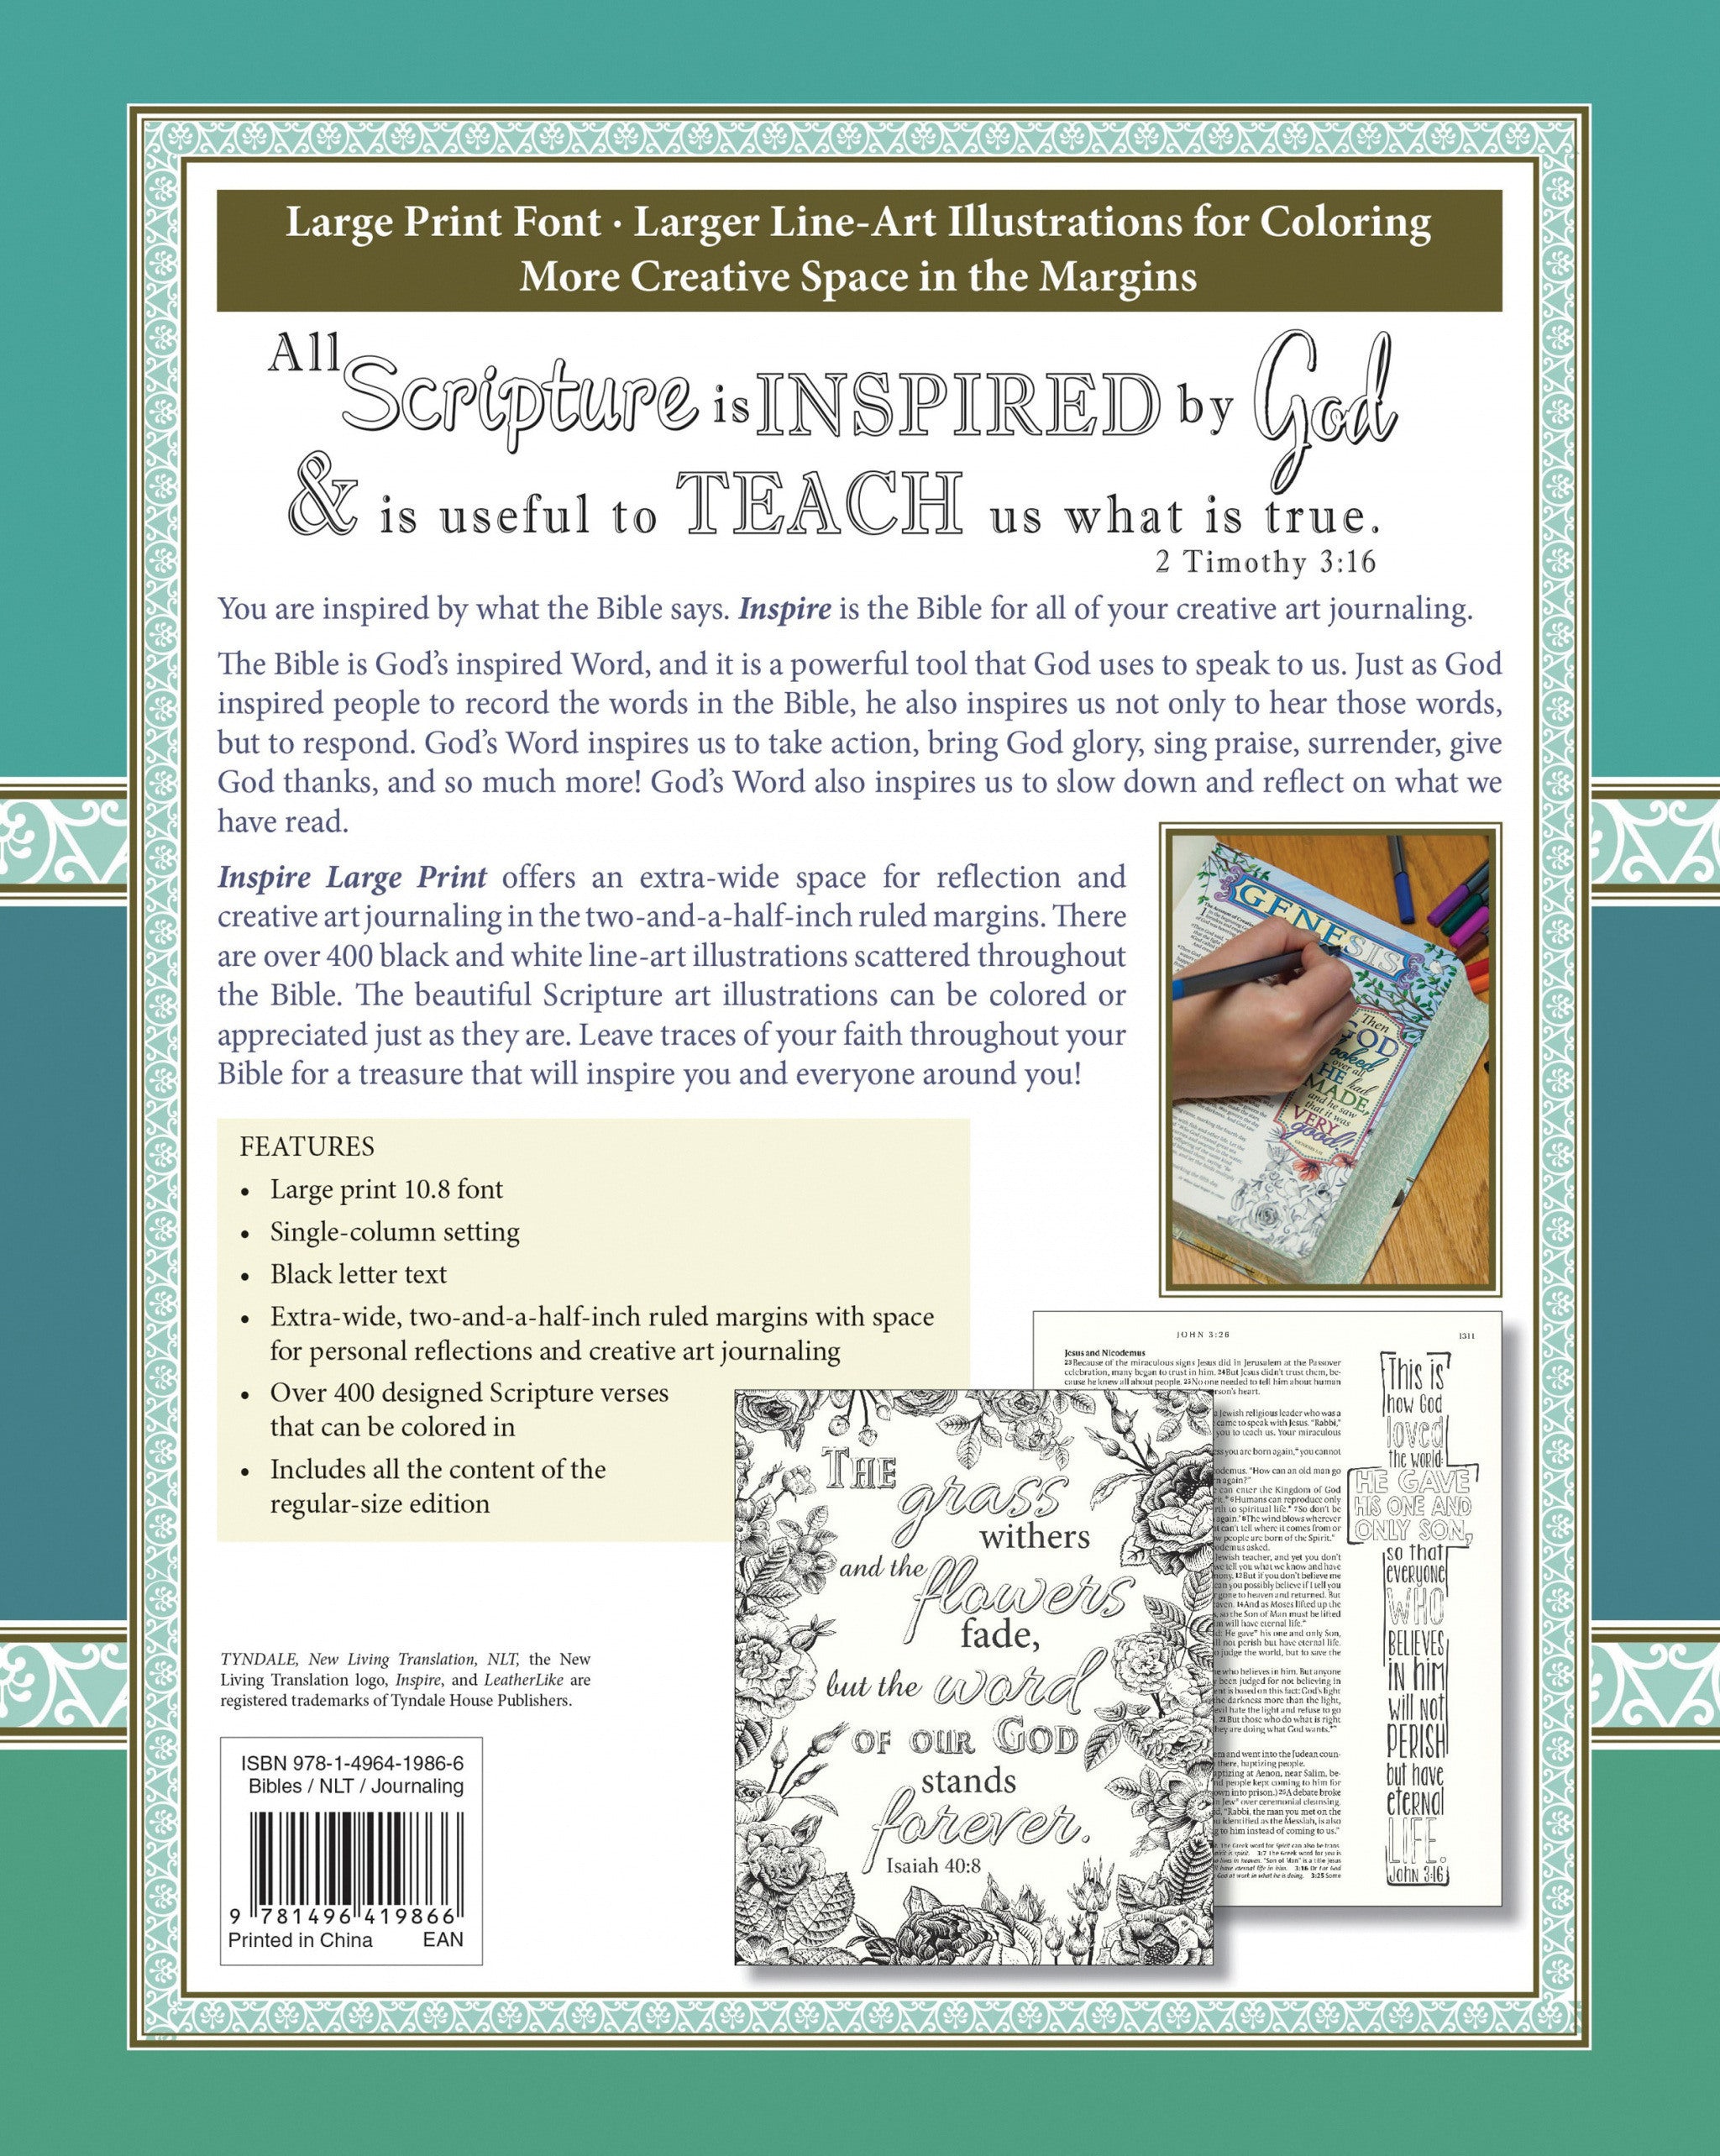 Image of NLT Inspire Bible Large Print other